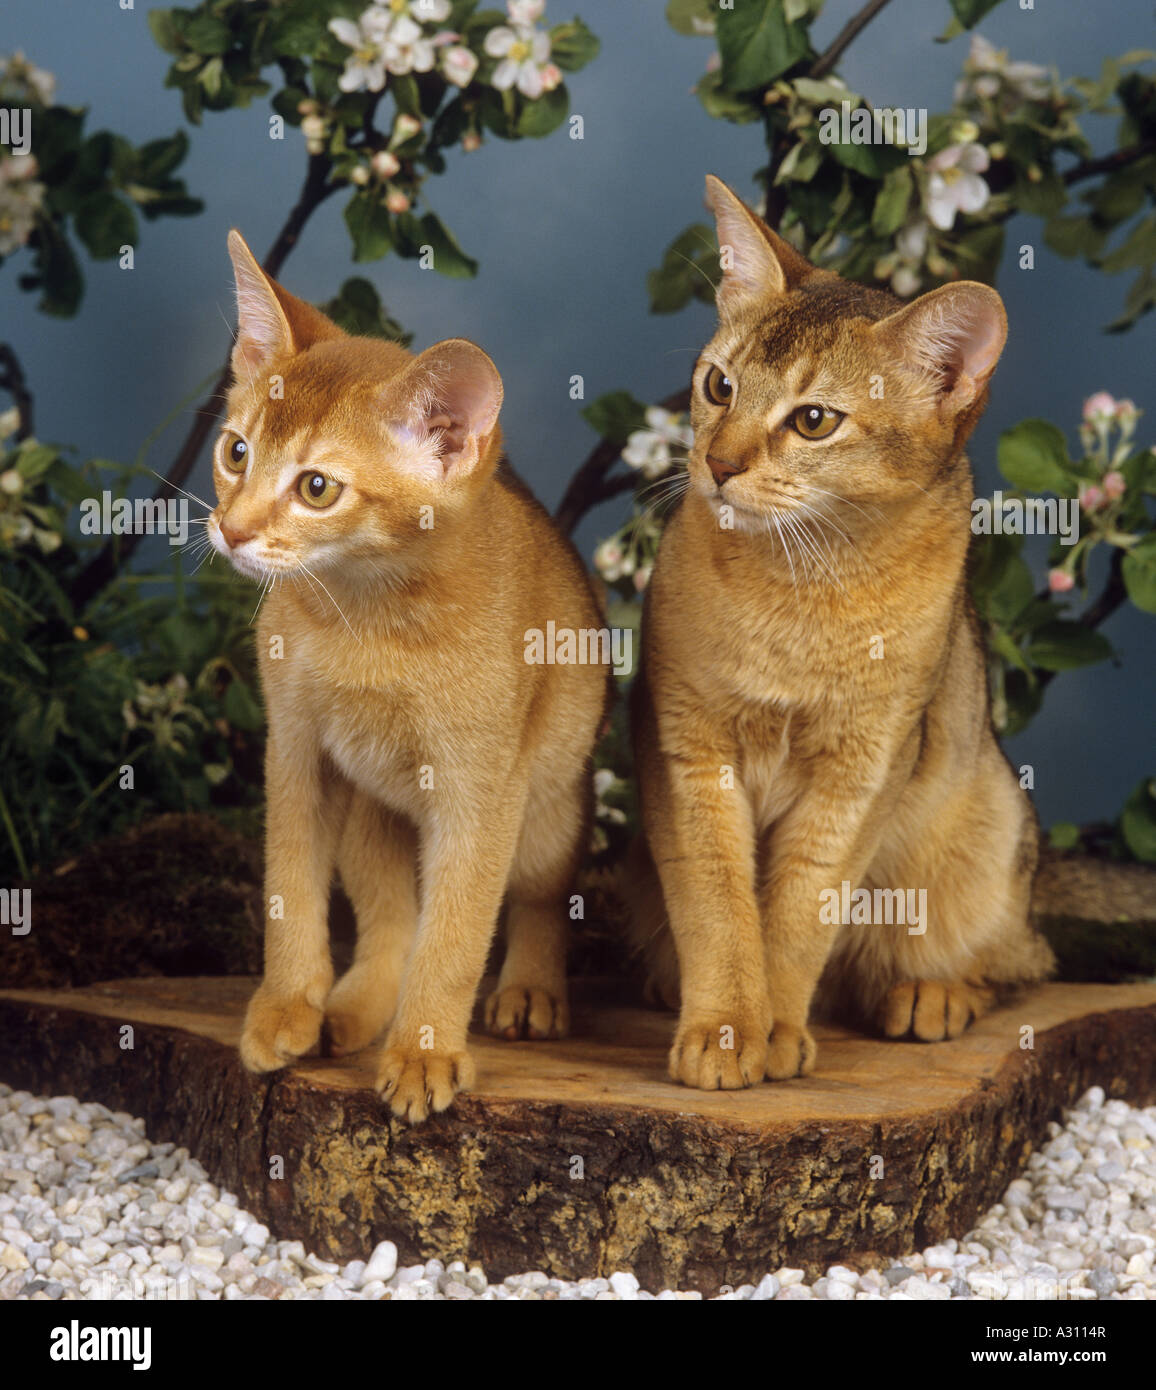 two Abyssinian cats Stock Photo